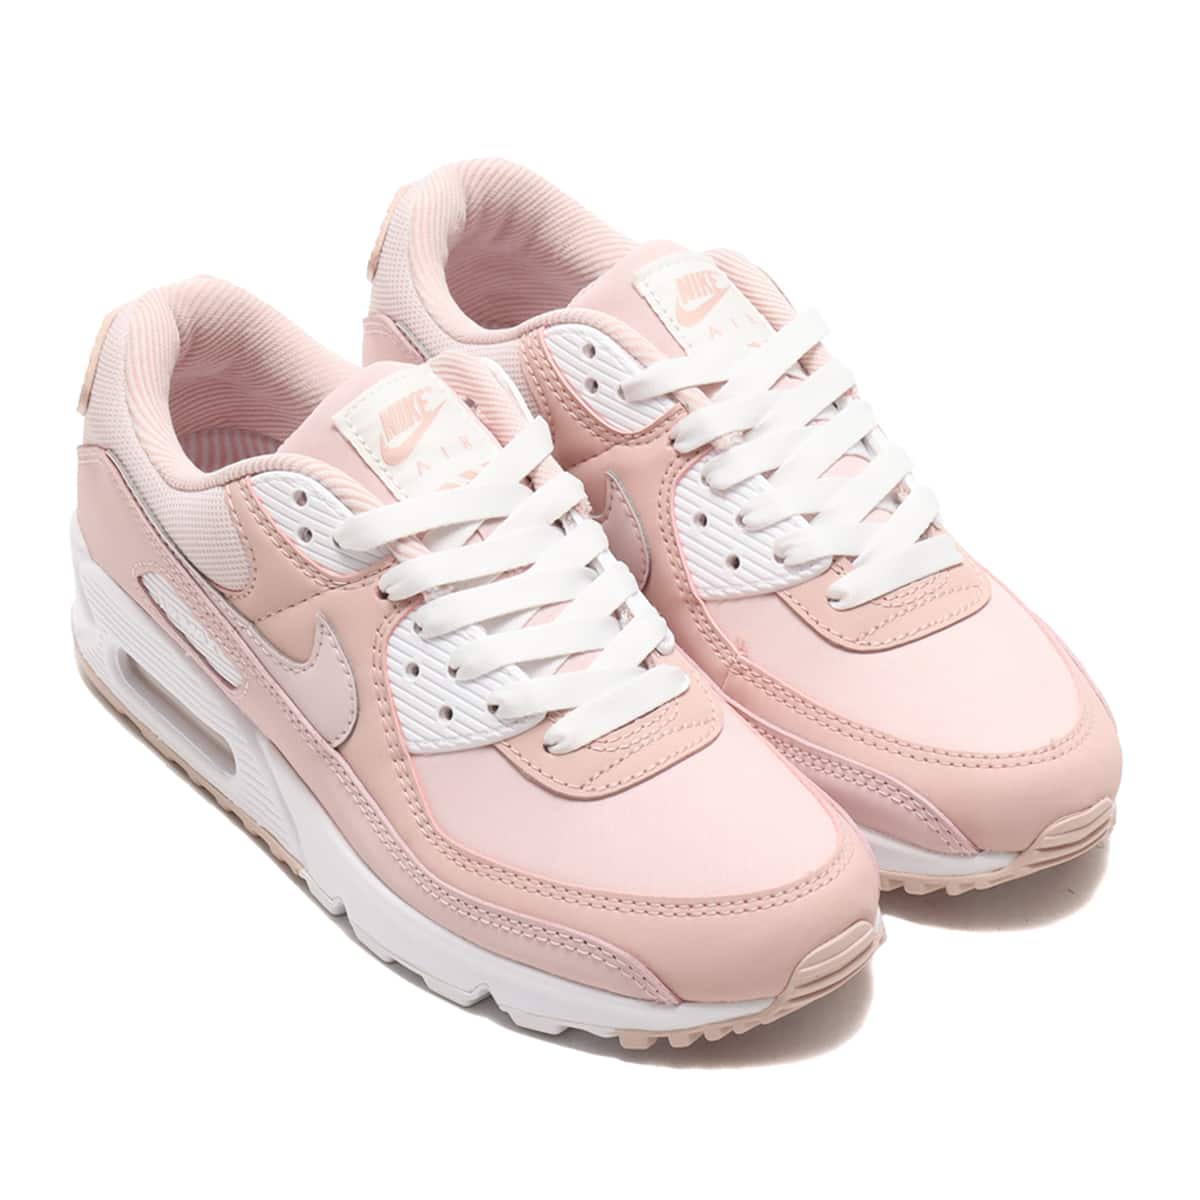 NIKE W AIR MAX 90 BARELY ROSE/BARELY ROSE-PINK OXFORD 21SU-I